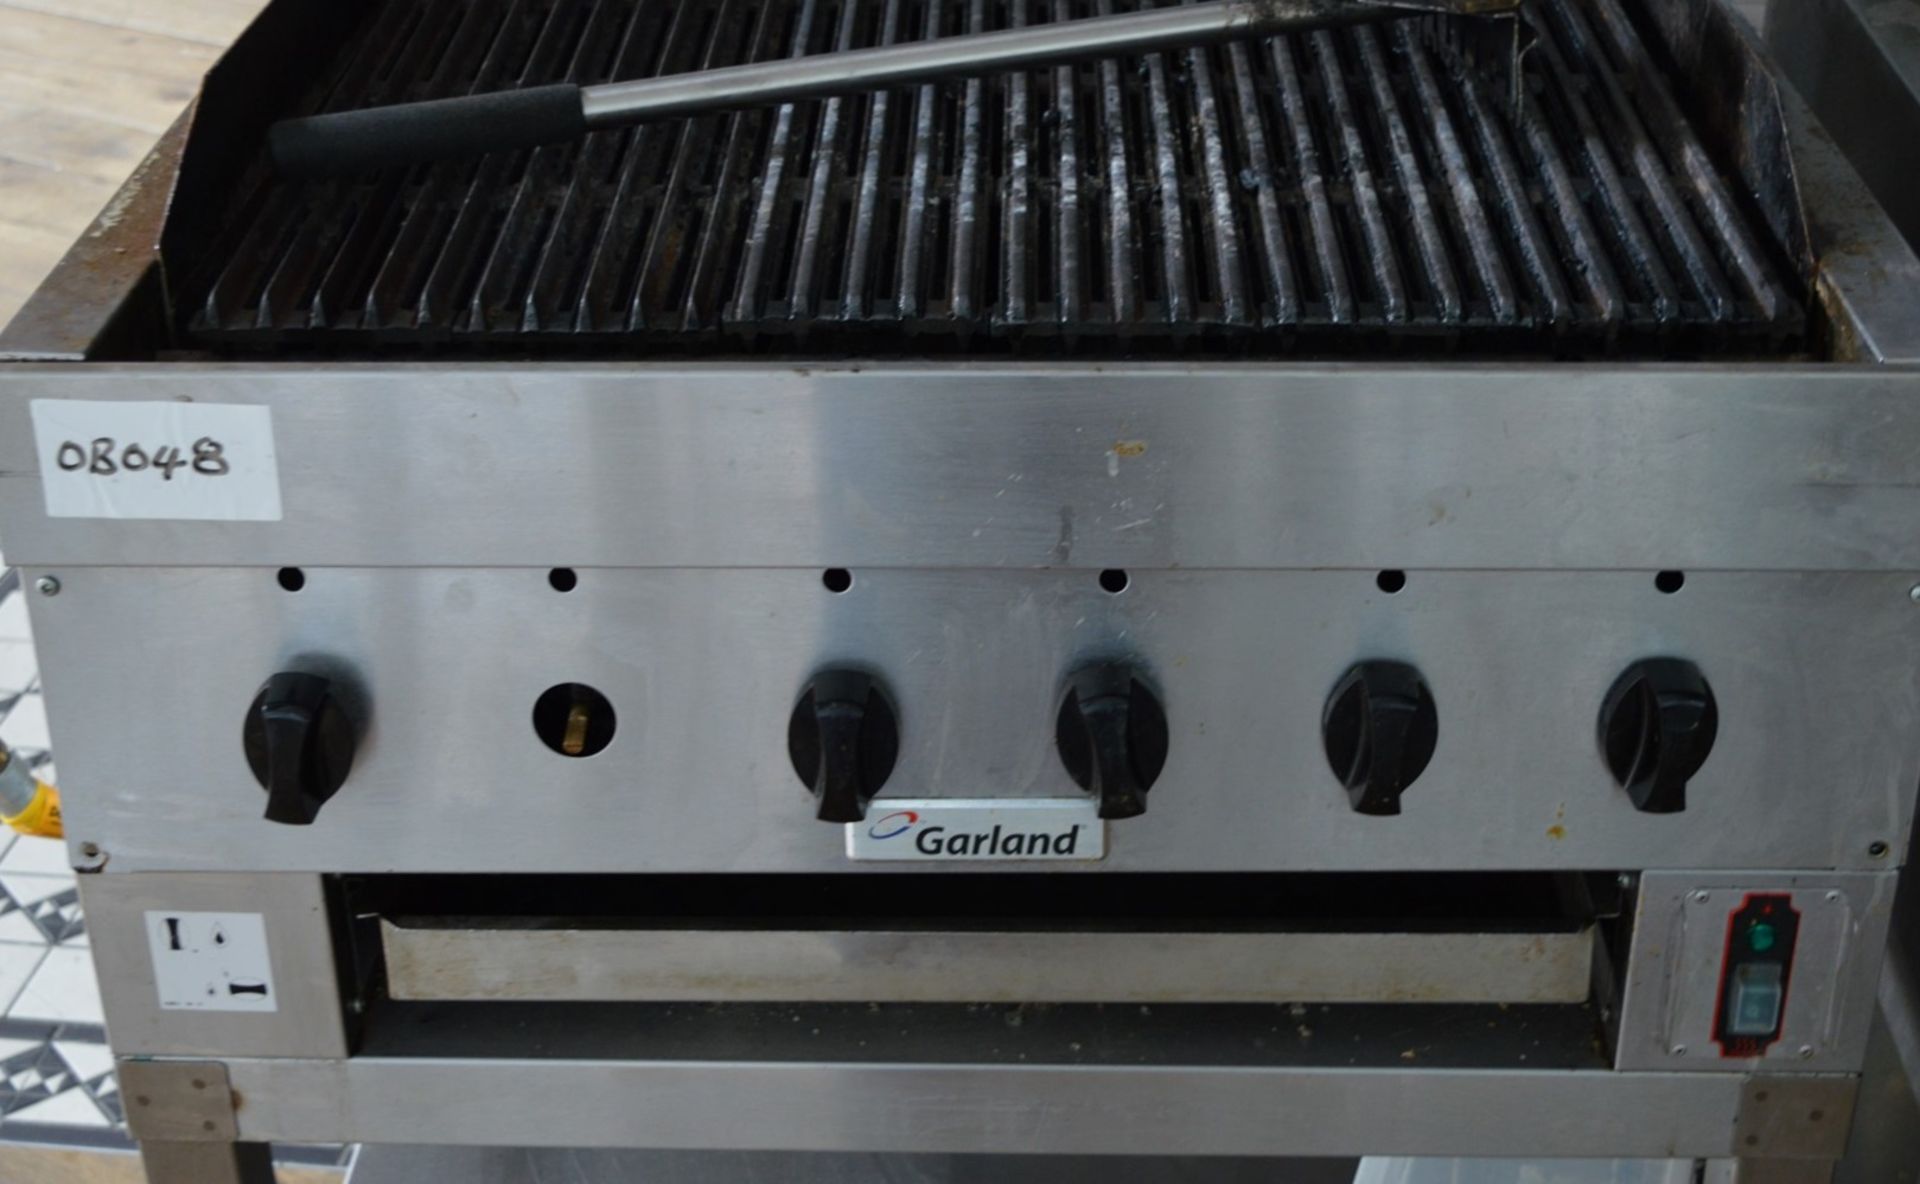 1 x Garland Stainless Steel Griddle With Stand - H91 x W85 x D75cms - CL245 - Dual Fuel Gas and - Image 7 of 8